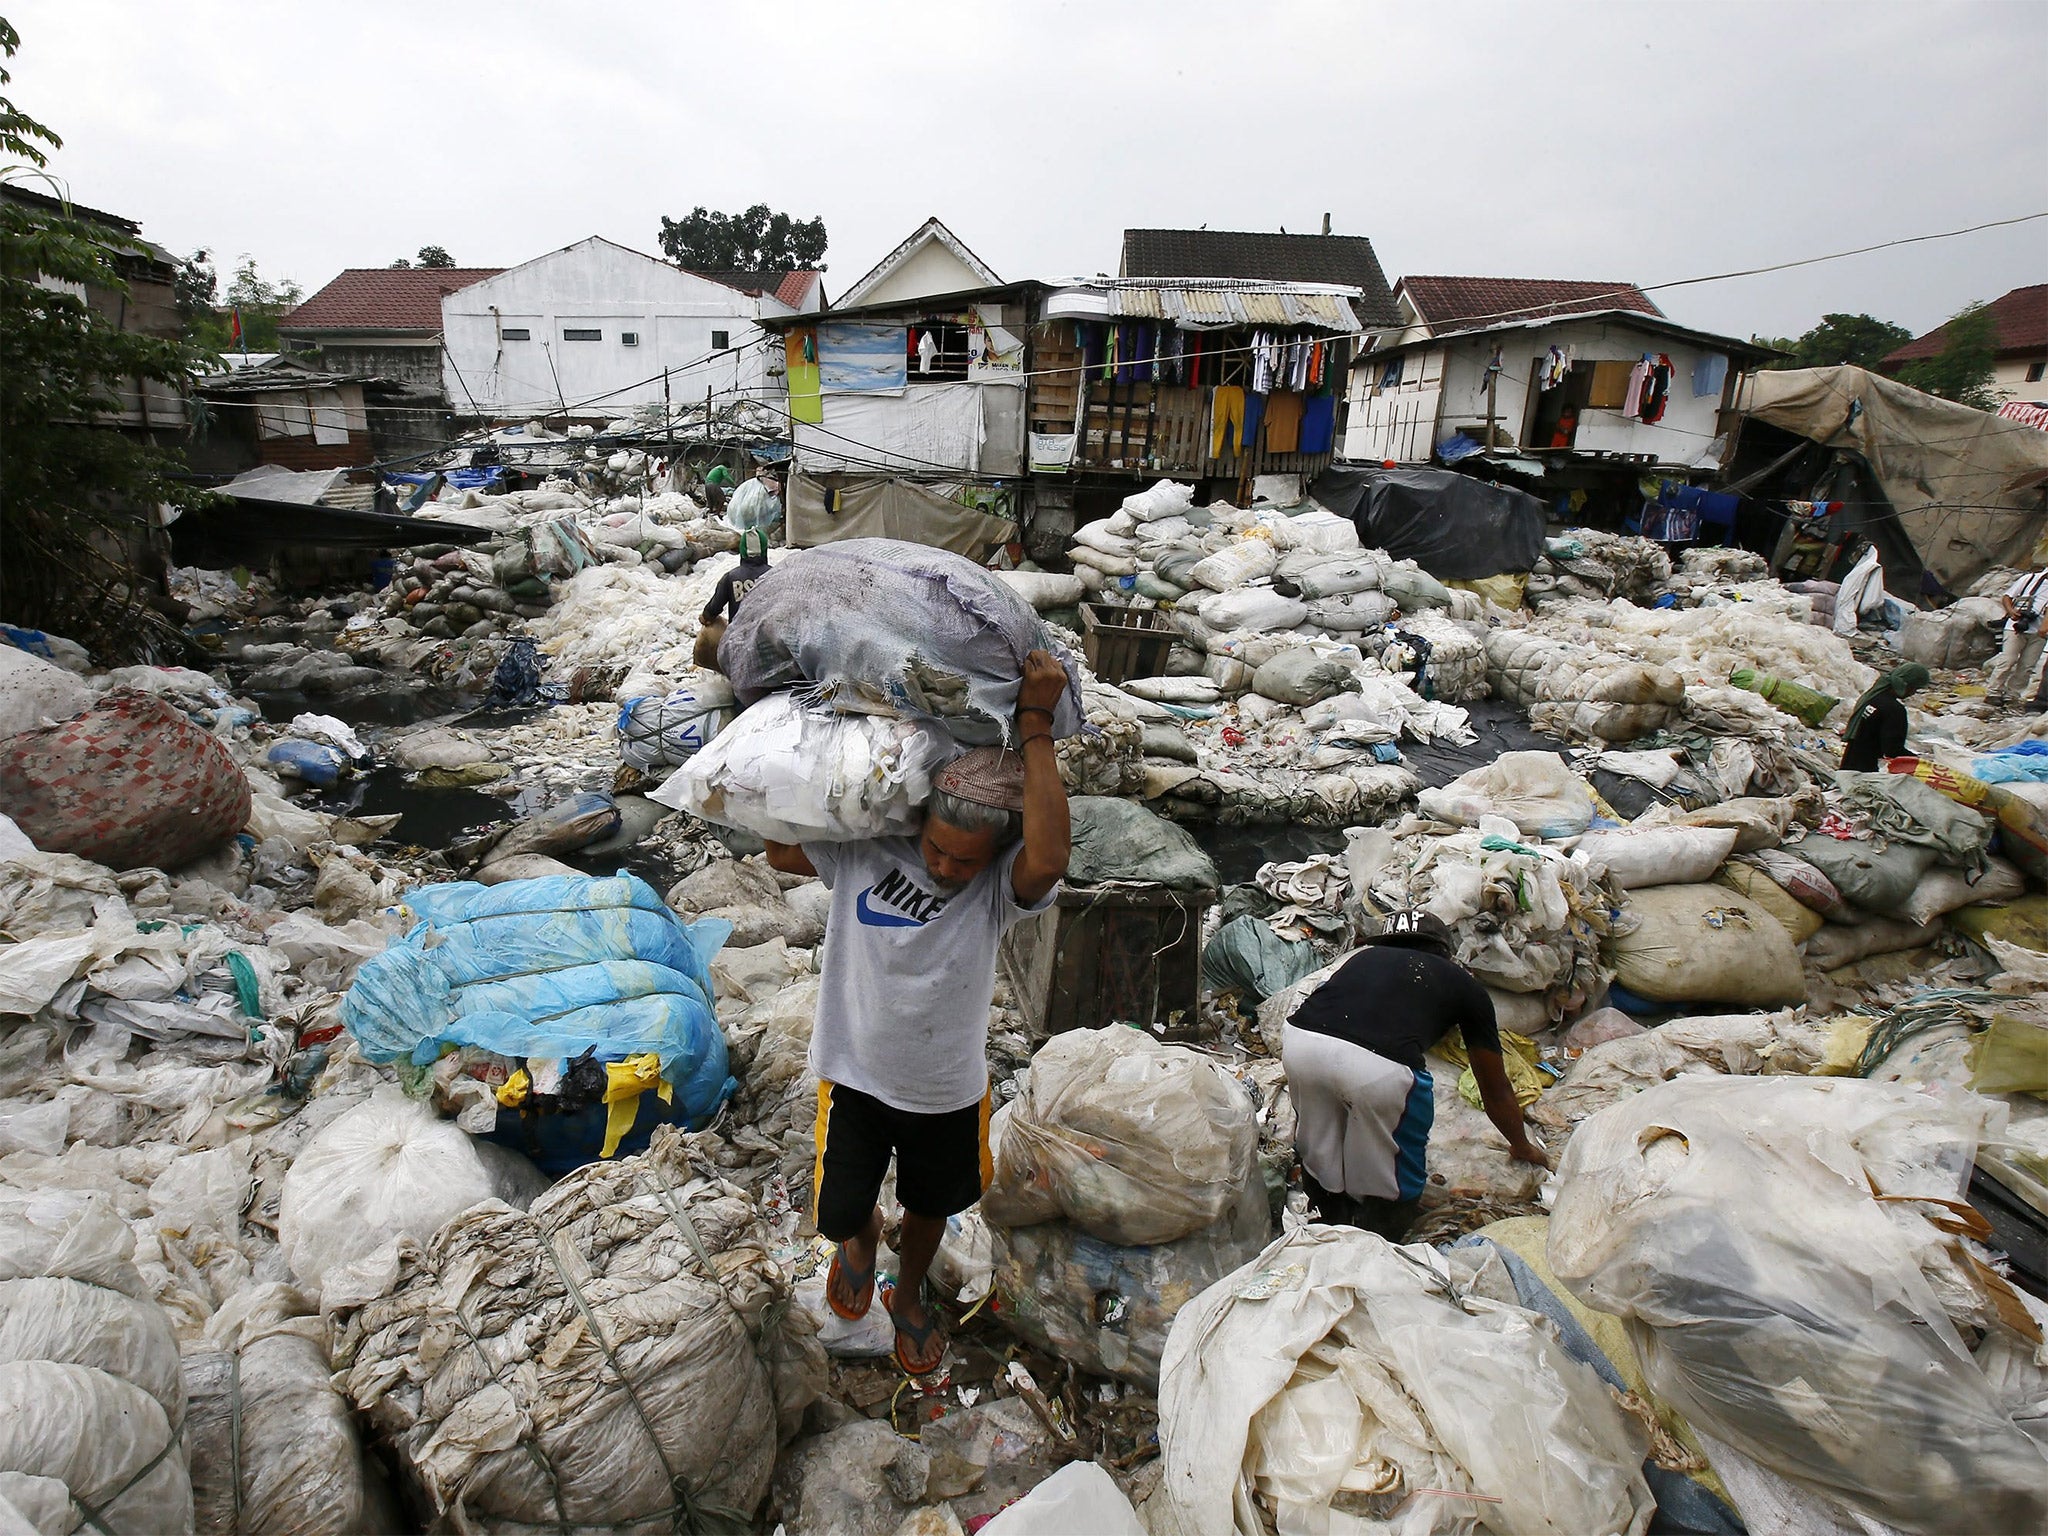 A Filipino man collects recyclable food at a dump site in Manila